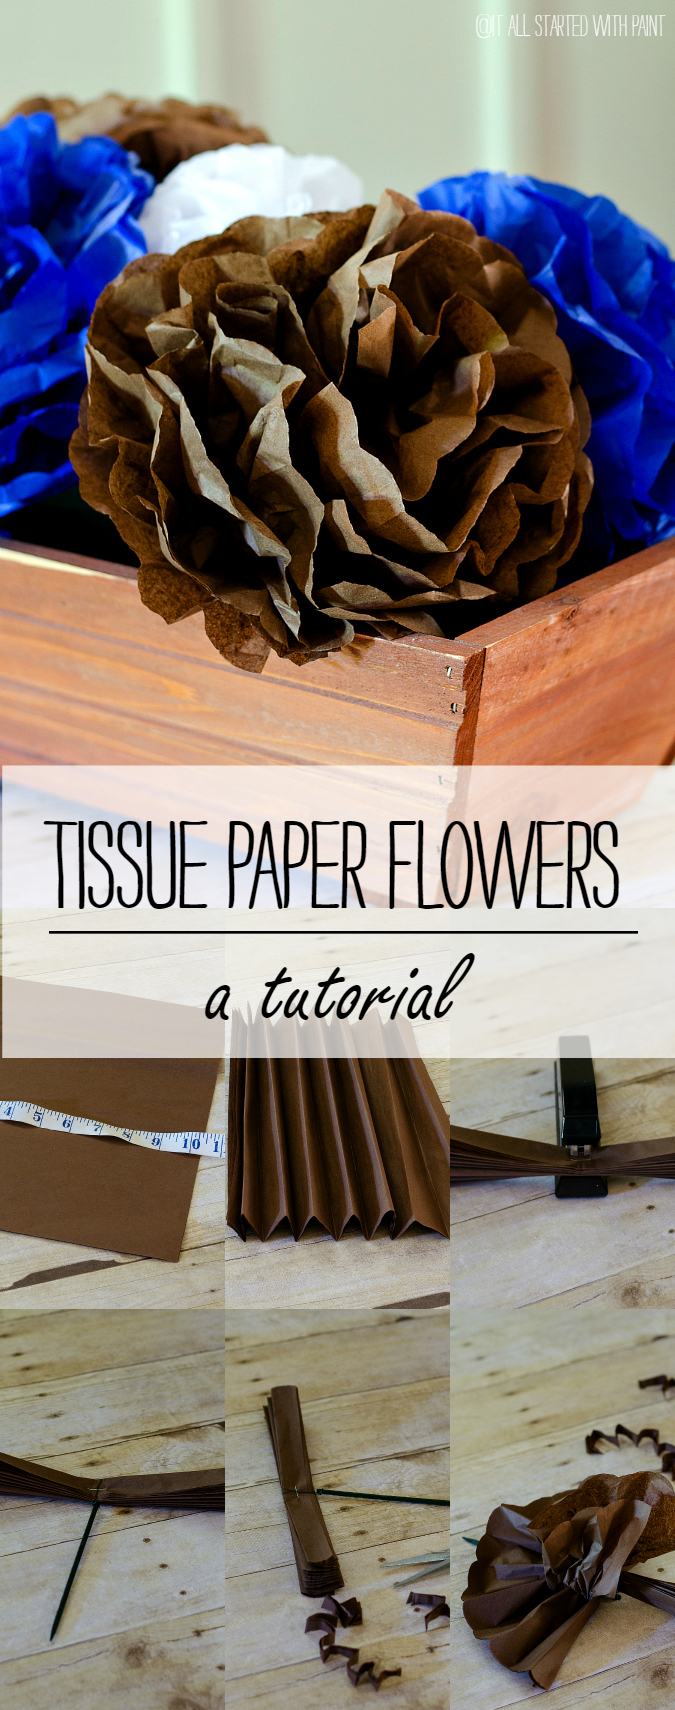 Tissue Paper Flowers: How To Make Tissue Paper Flowers